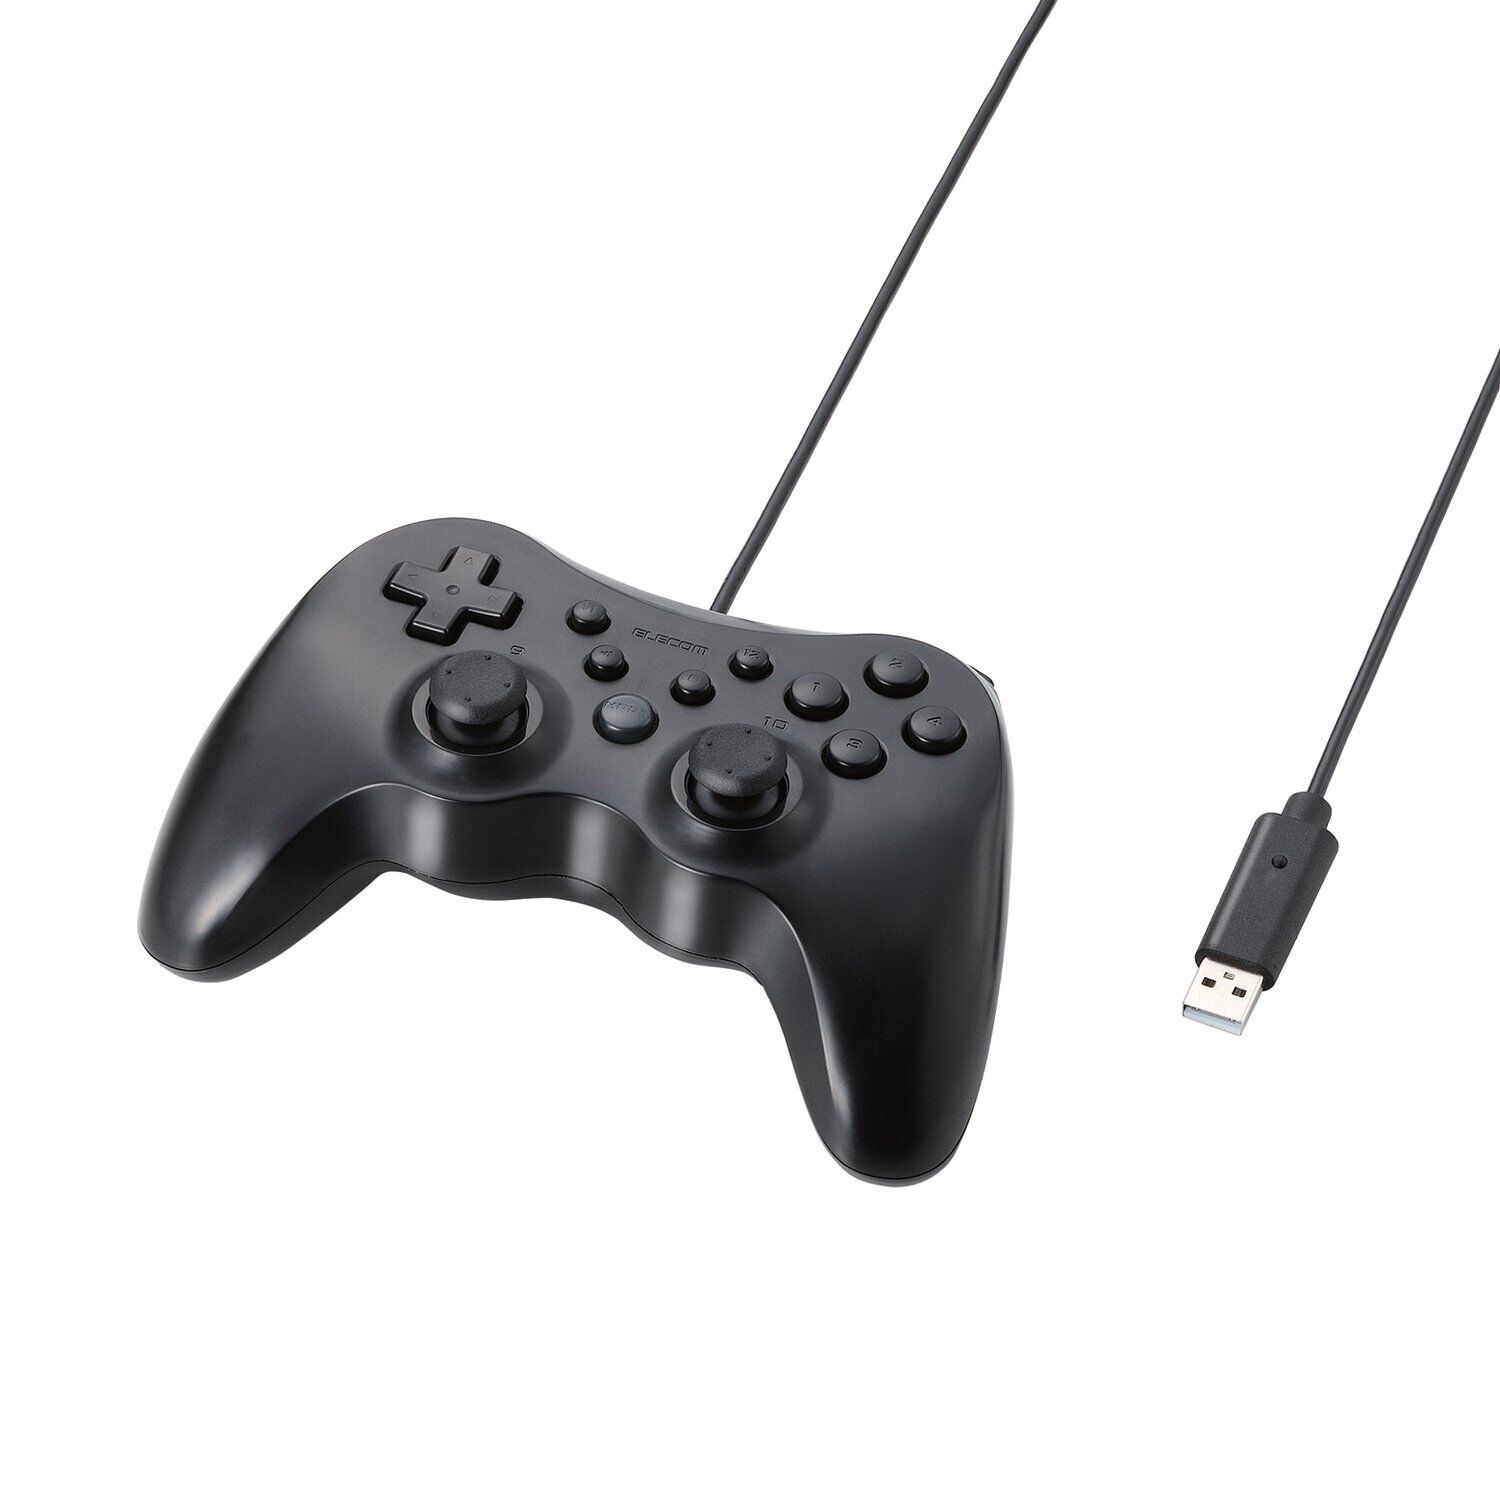 ELECOM Game Pad 12 button fire function JC-U3712TBK Black USB A 1.7m Cable NEW